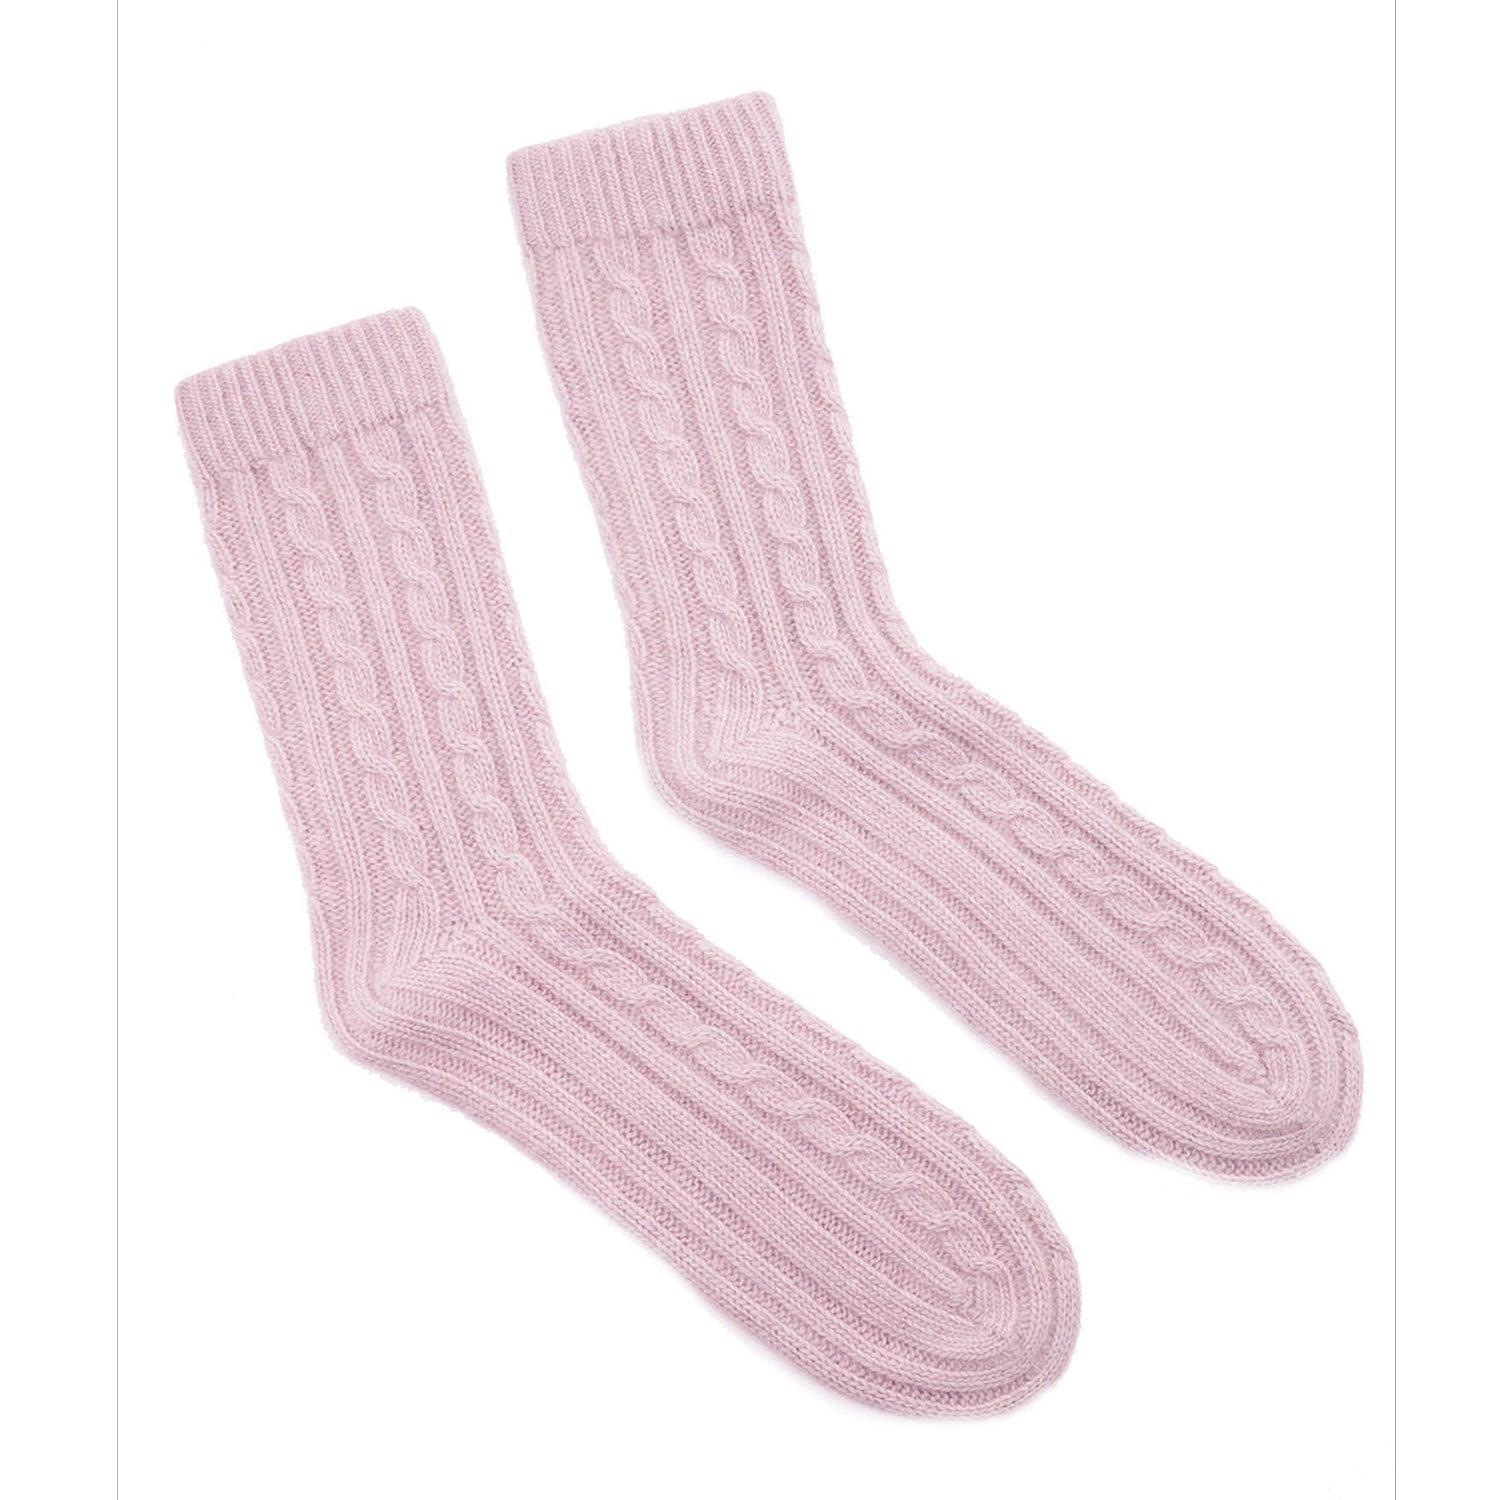 LADIES CASHMERE CABLE BOOTIES-BABY PINK - Scarvesnthangs